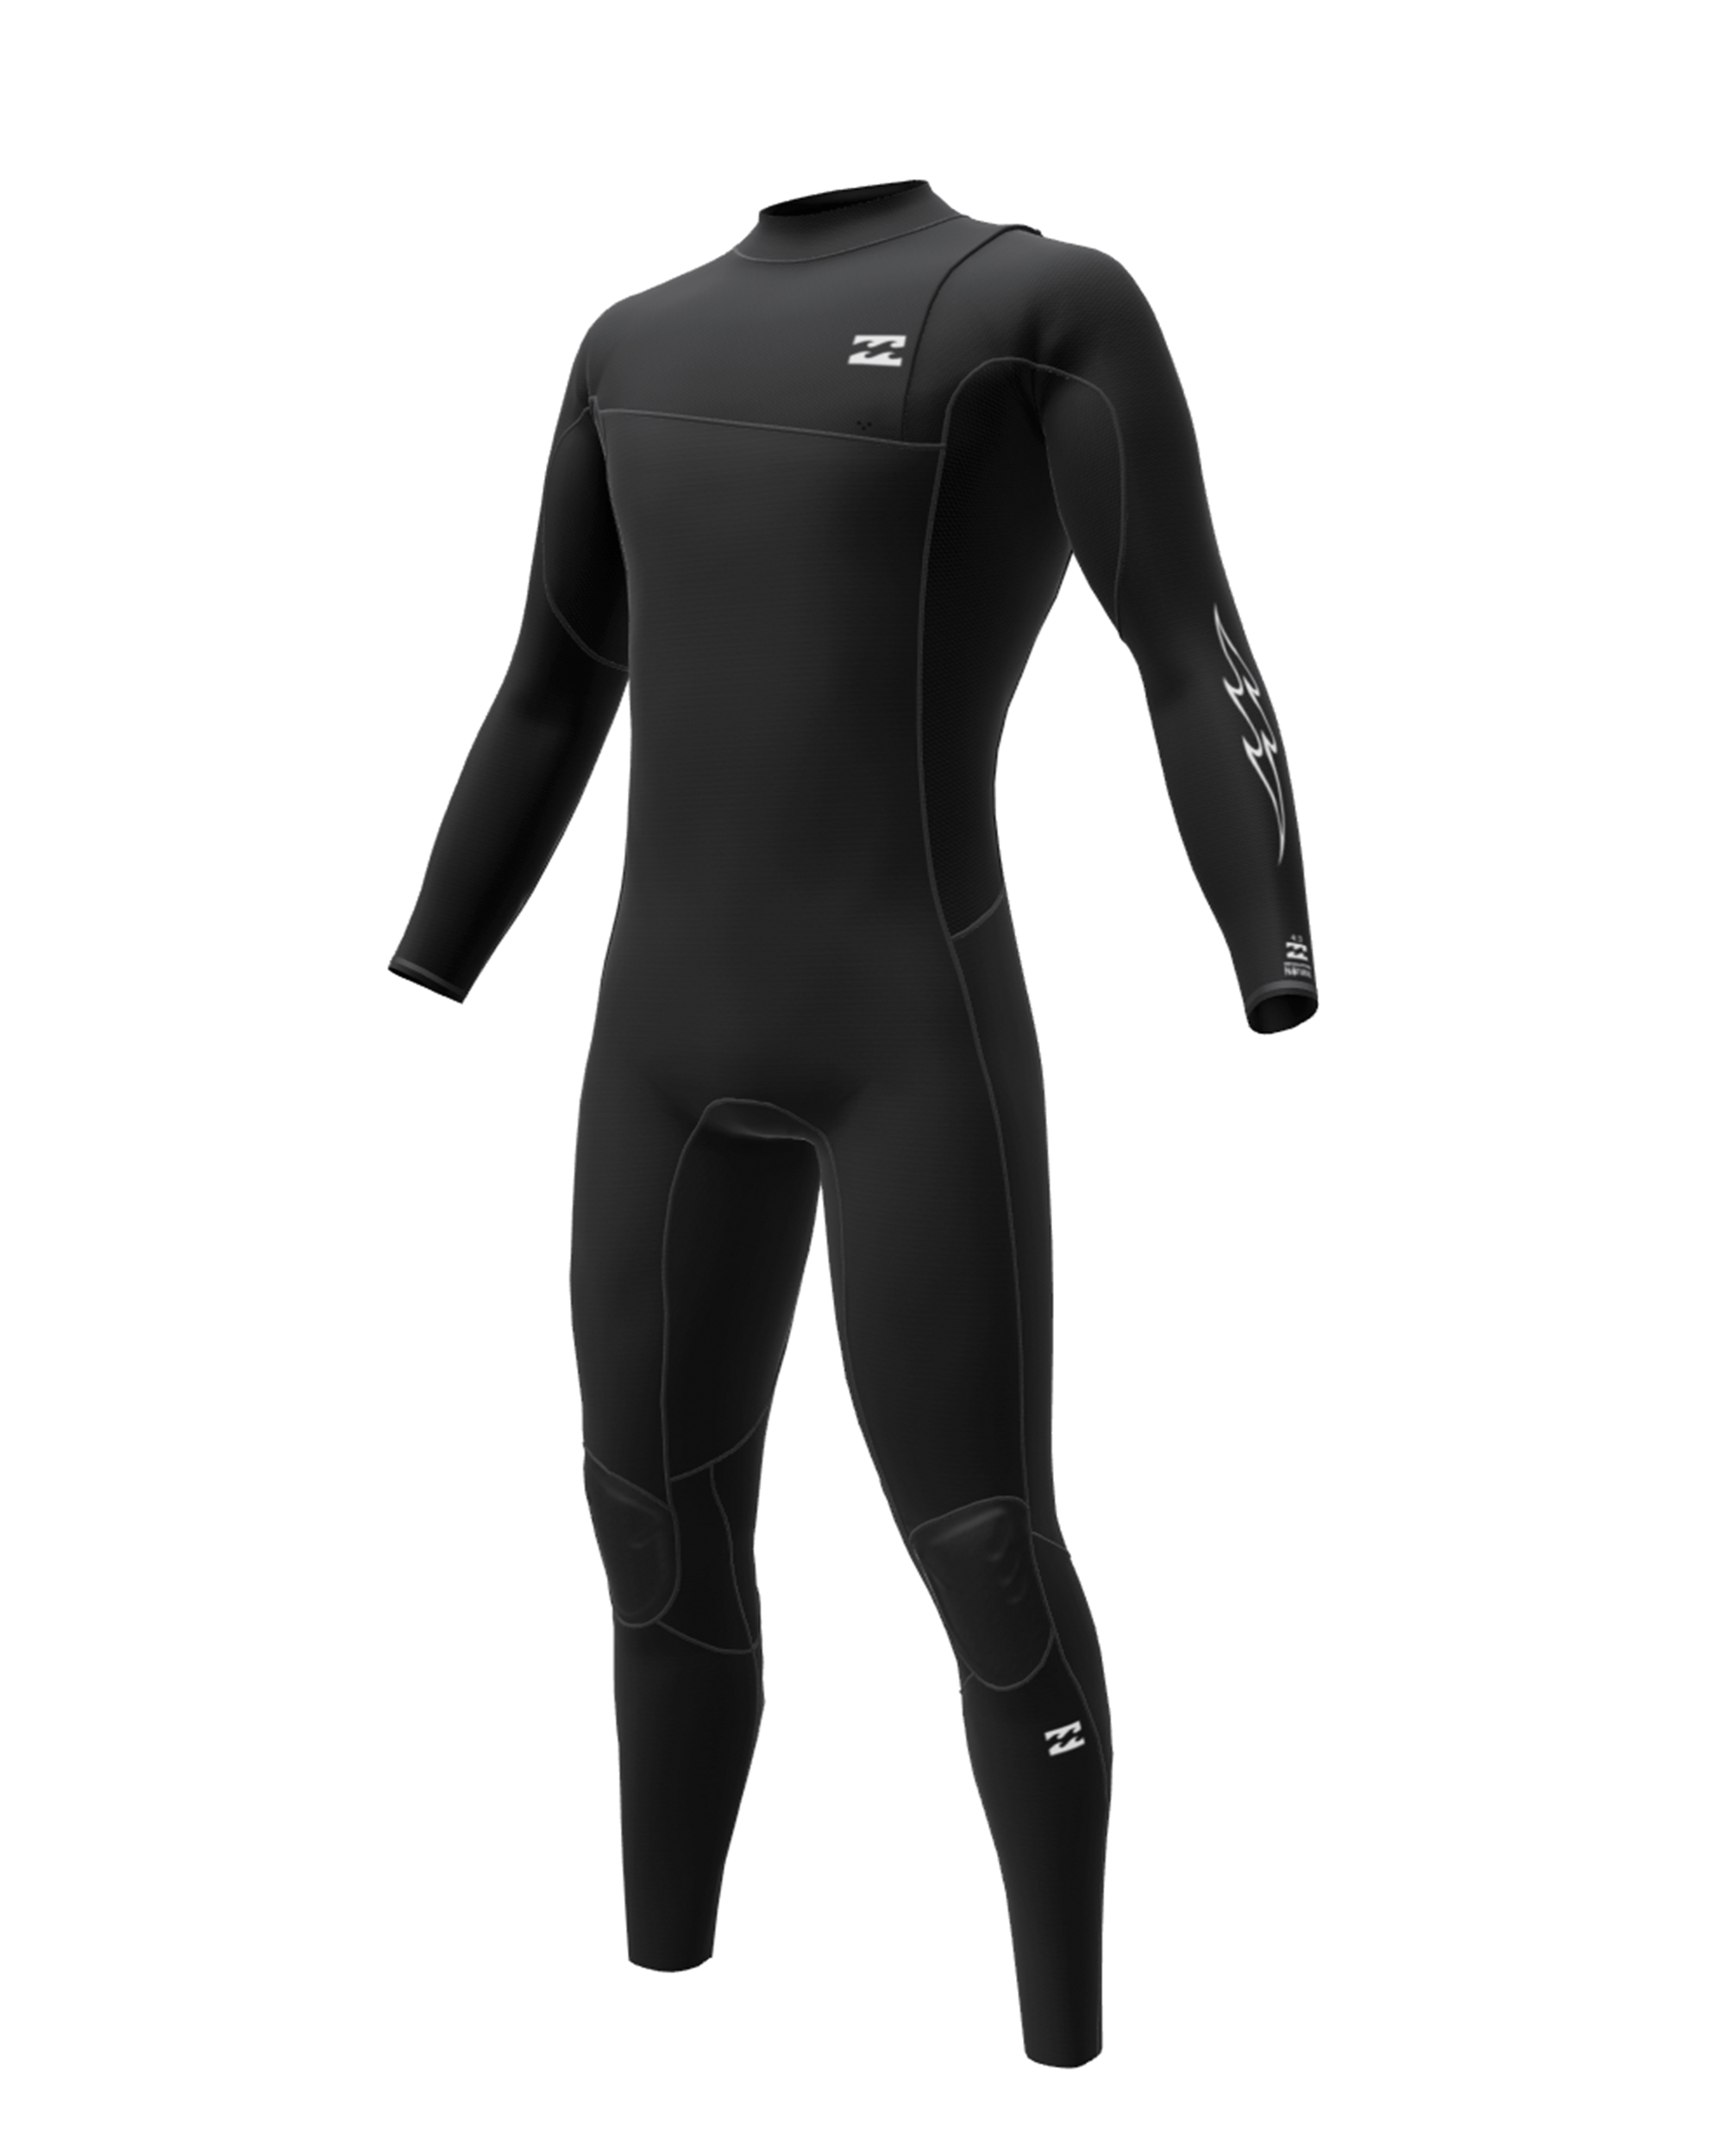 Mens Custom Wetsuits – Create your own style